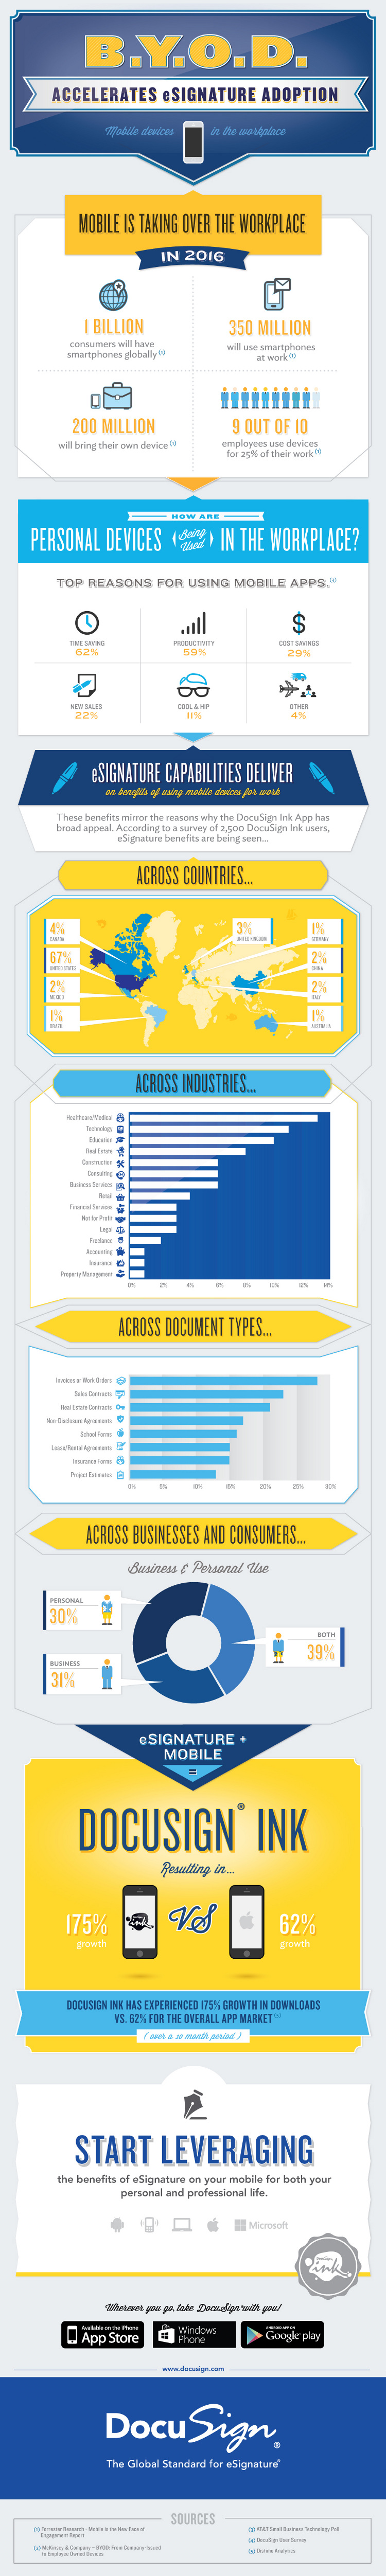 docusign mobile device infographic